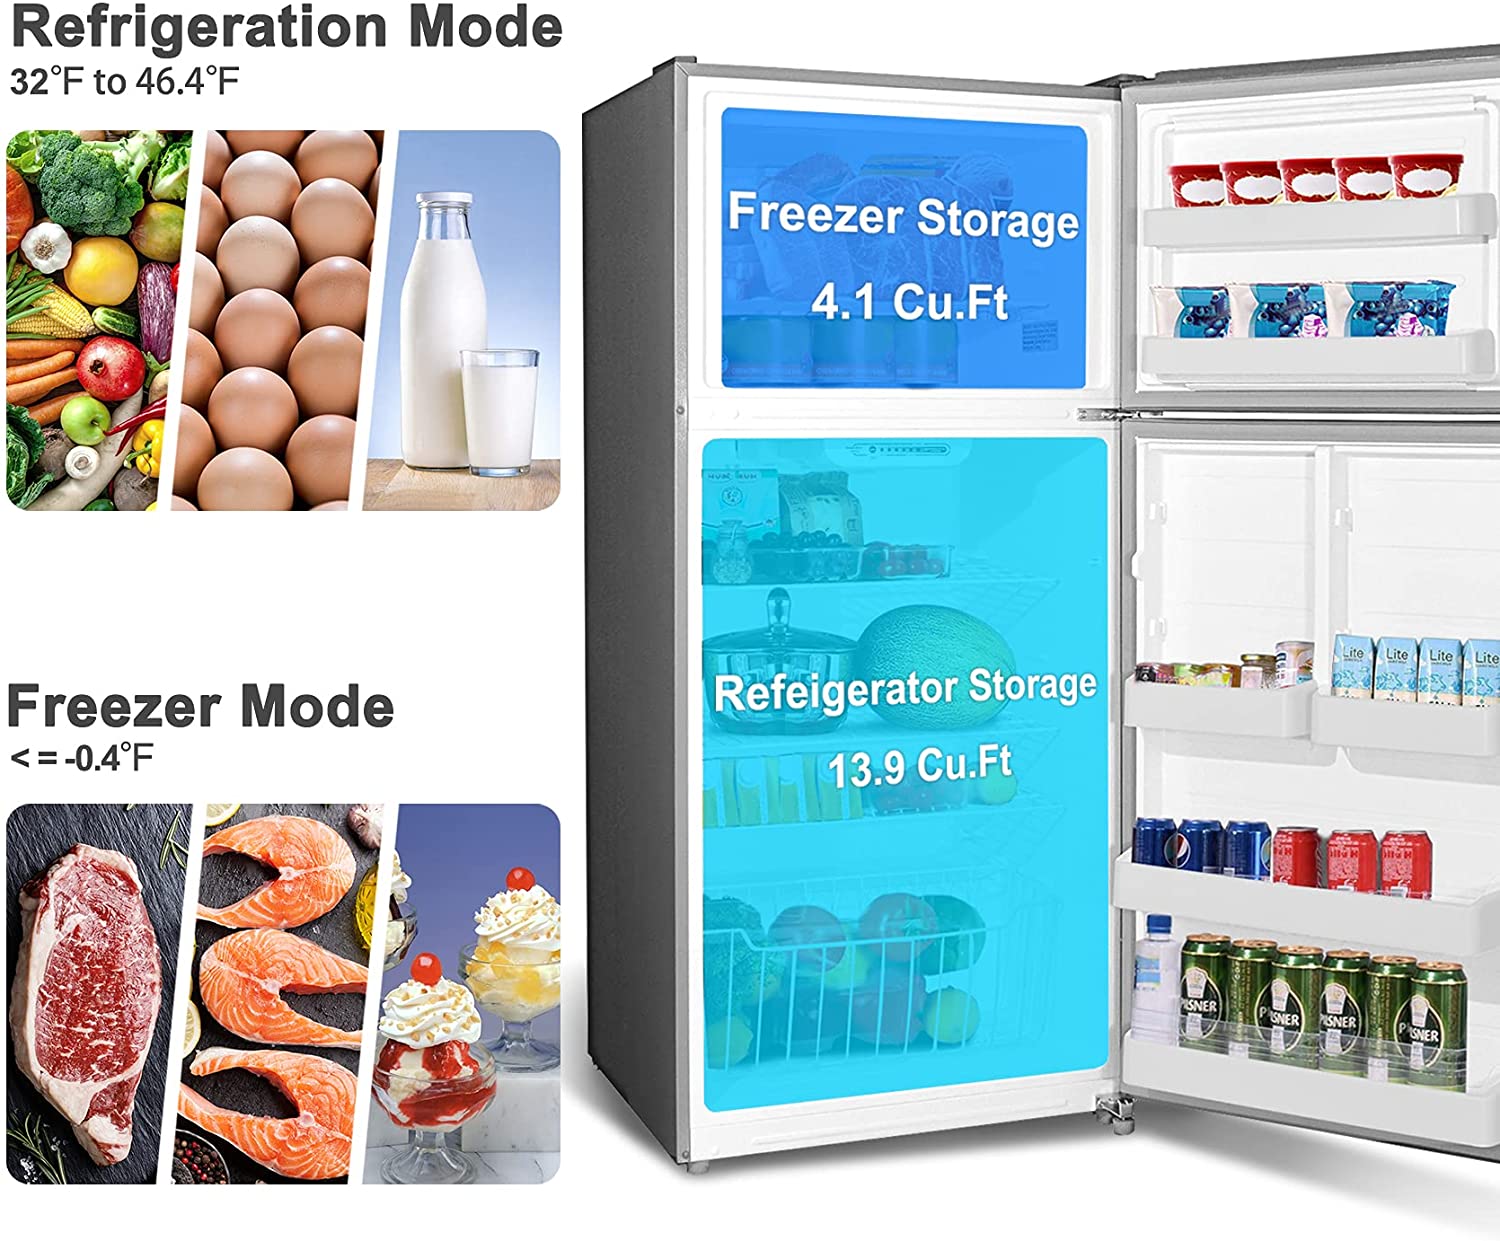 SMAD Top Mount Refrigerator with 4 cu.ft. Freezer-18 cu.ft. - Multi-functional view